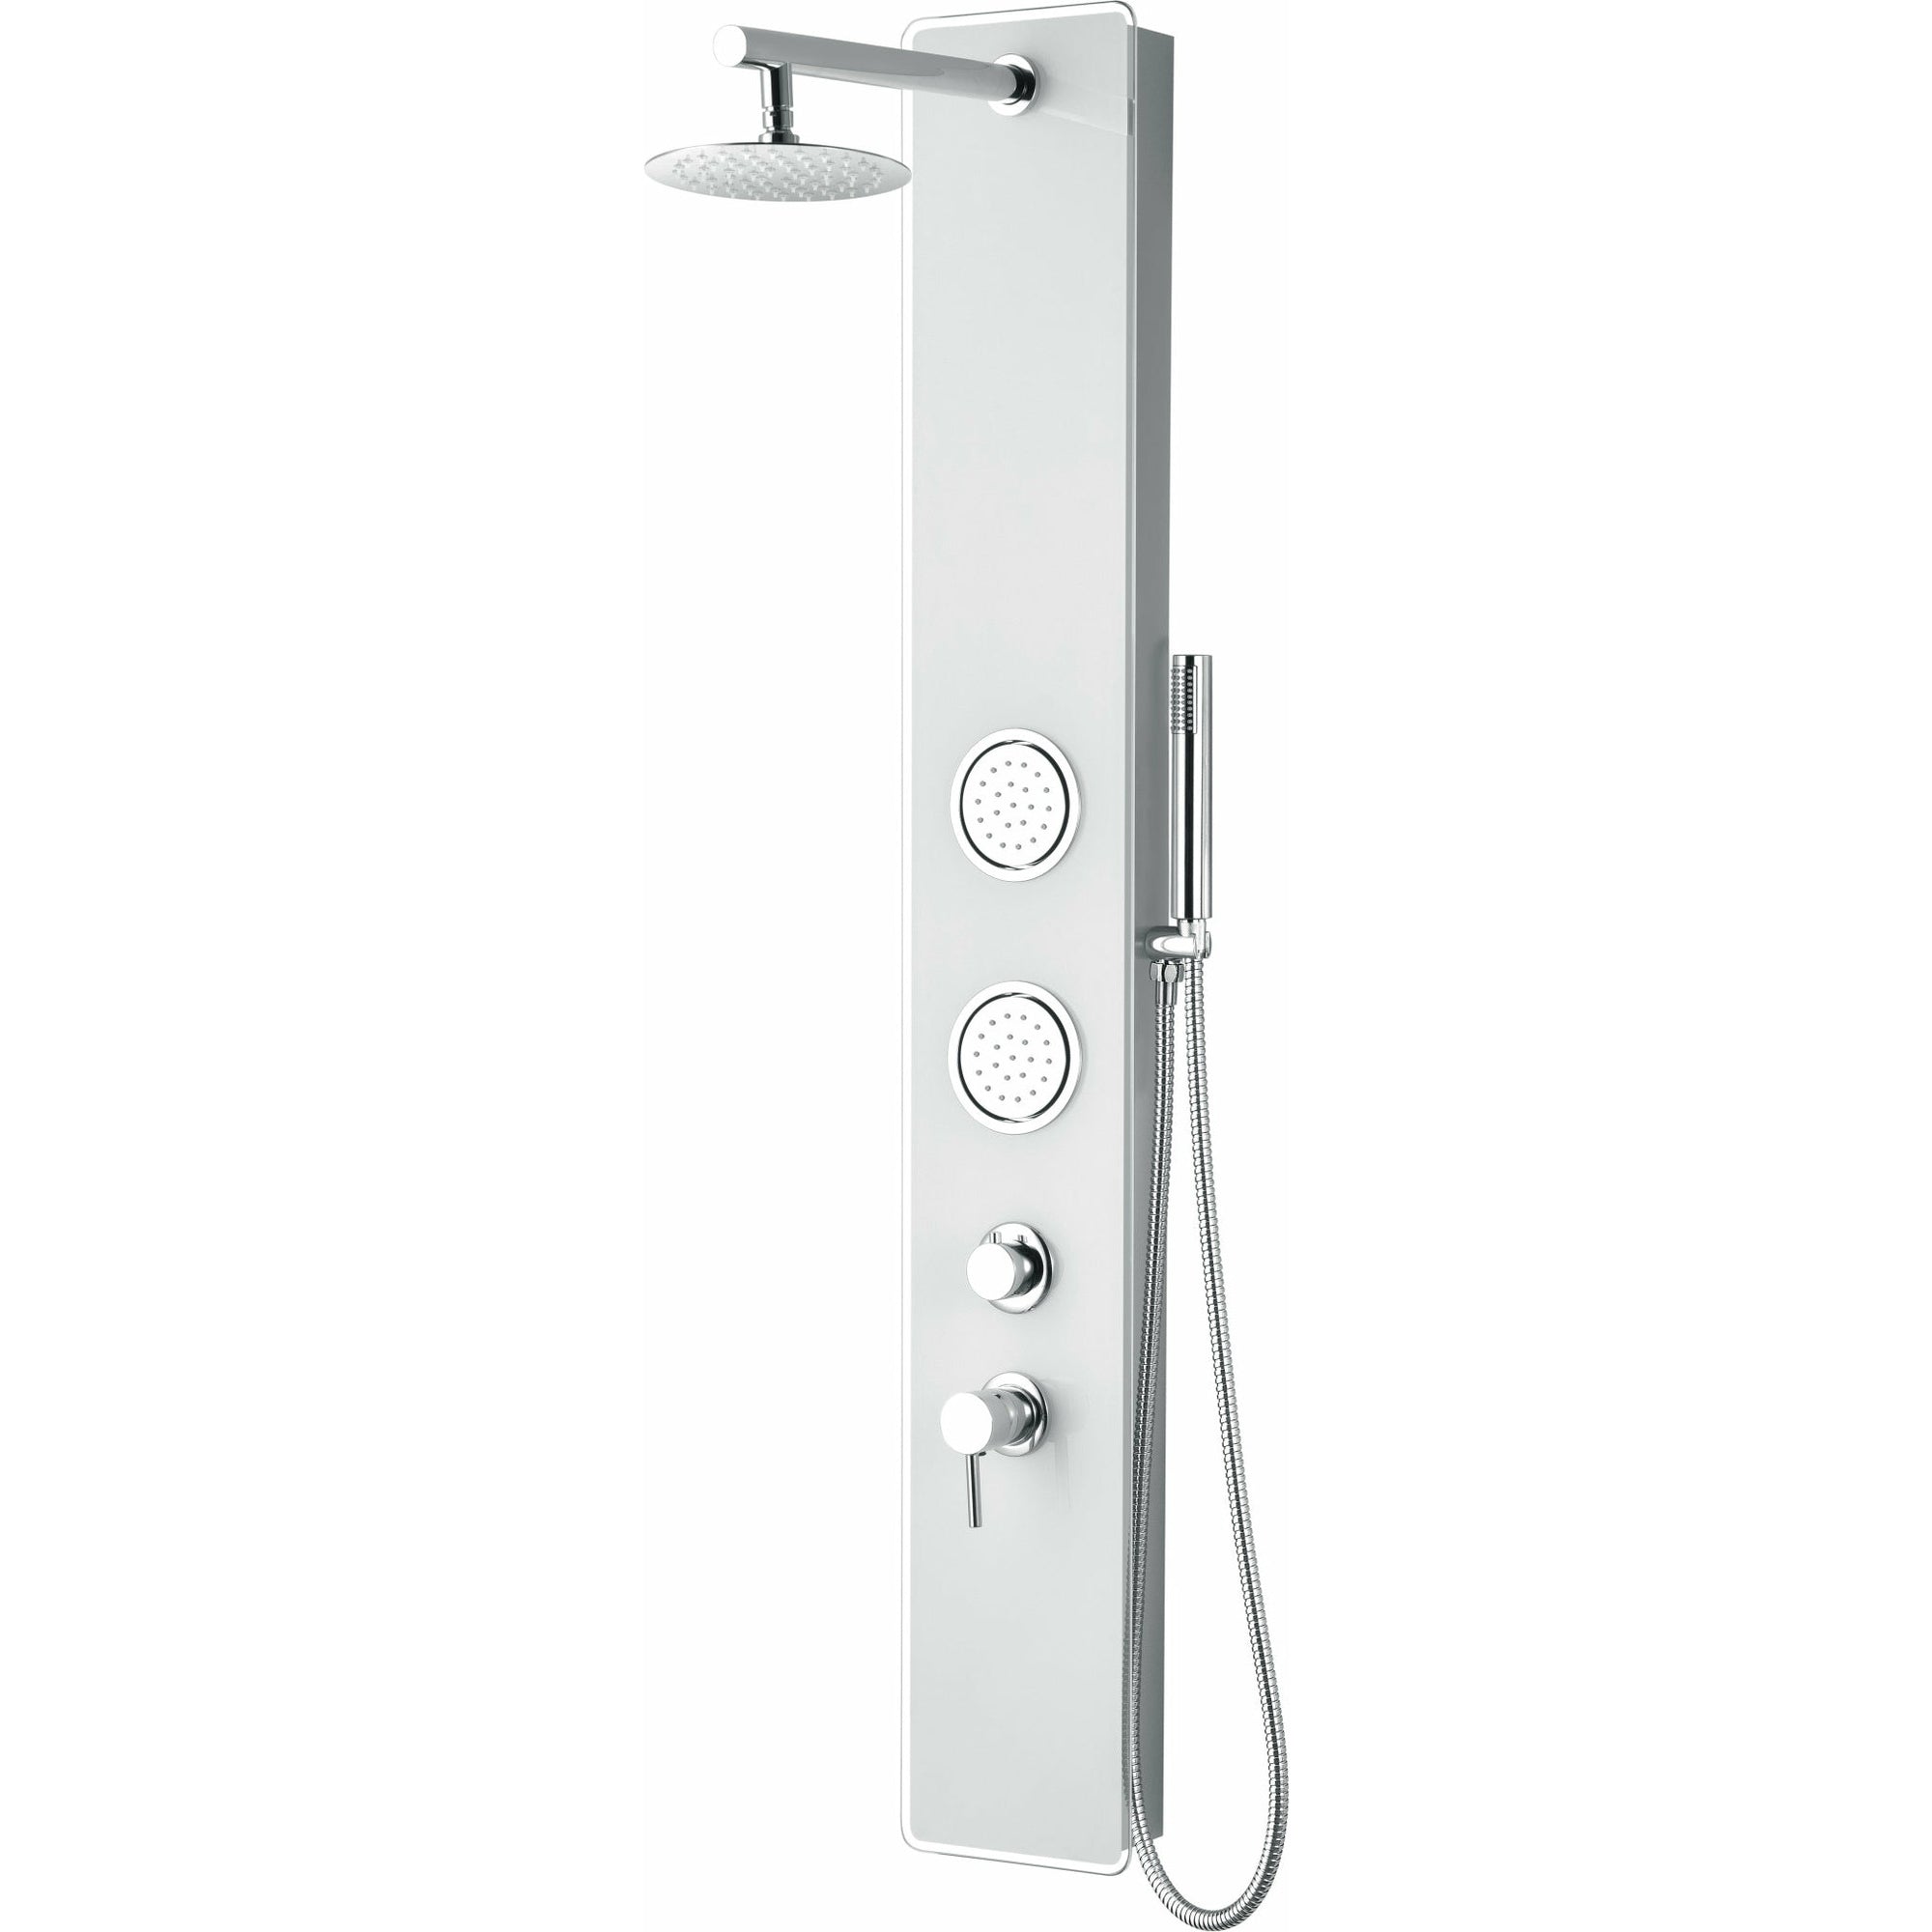 ALFI ABSP50W White Glass Shower Panel with 2 Body Spray, Overhead Rain Shower Head, Sleek Stainless Steel panel with Polished Chrome handles & knob, Flexible reinforced stainless steel hot & cold water supply hose, Handheld sprayer in a white background.